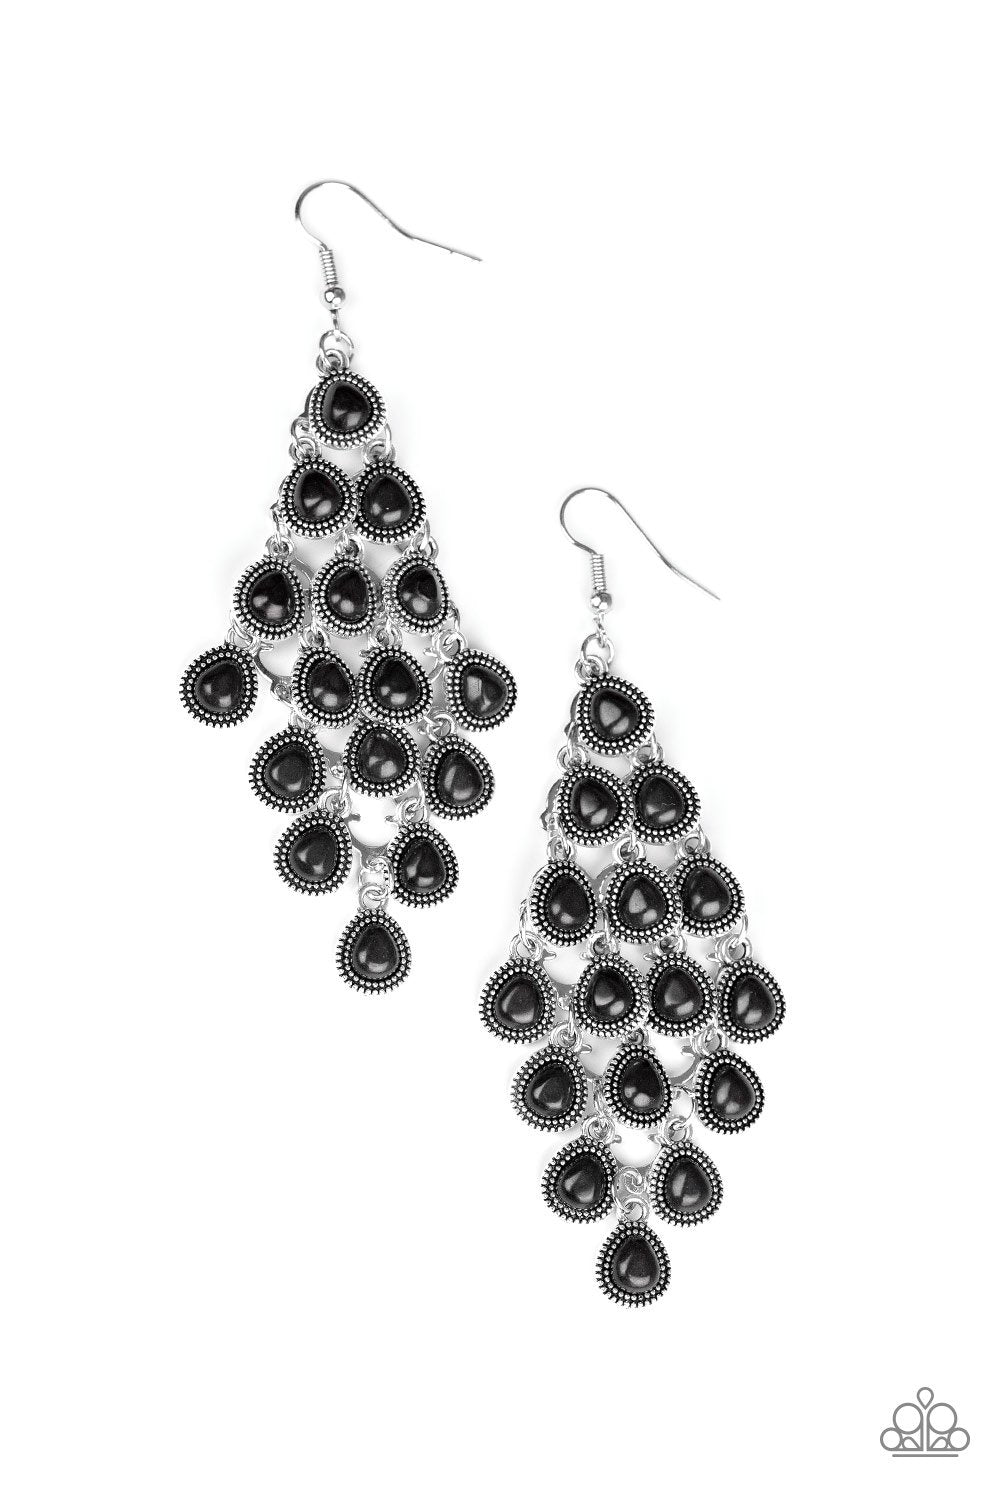 Rural Rainstorms Black Stone Cascading Teardrop Earrings - Paparazzi Accessories-CarasShop.com - $5 Jewelry by Cara Jewels